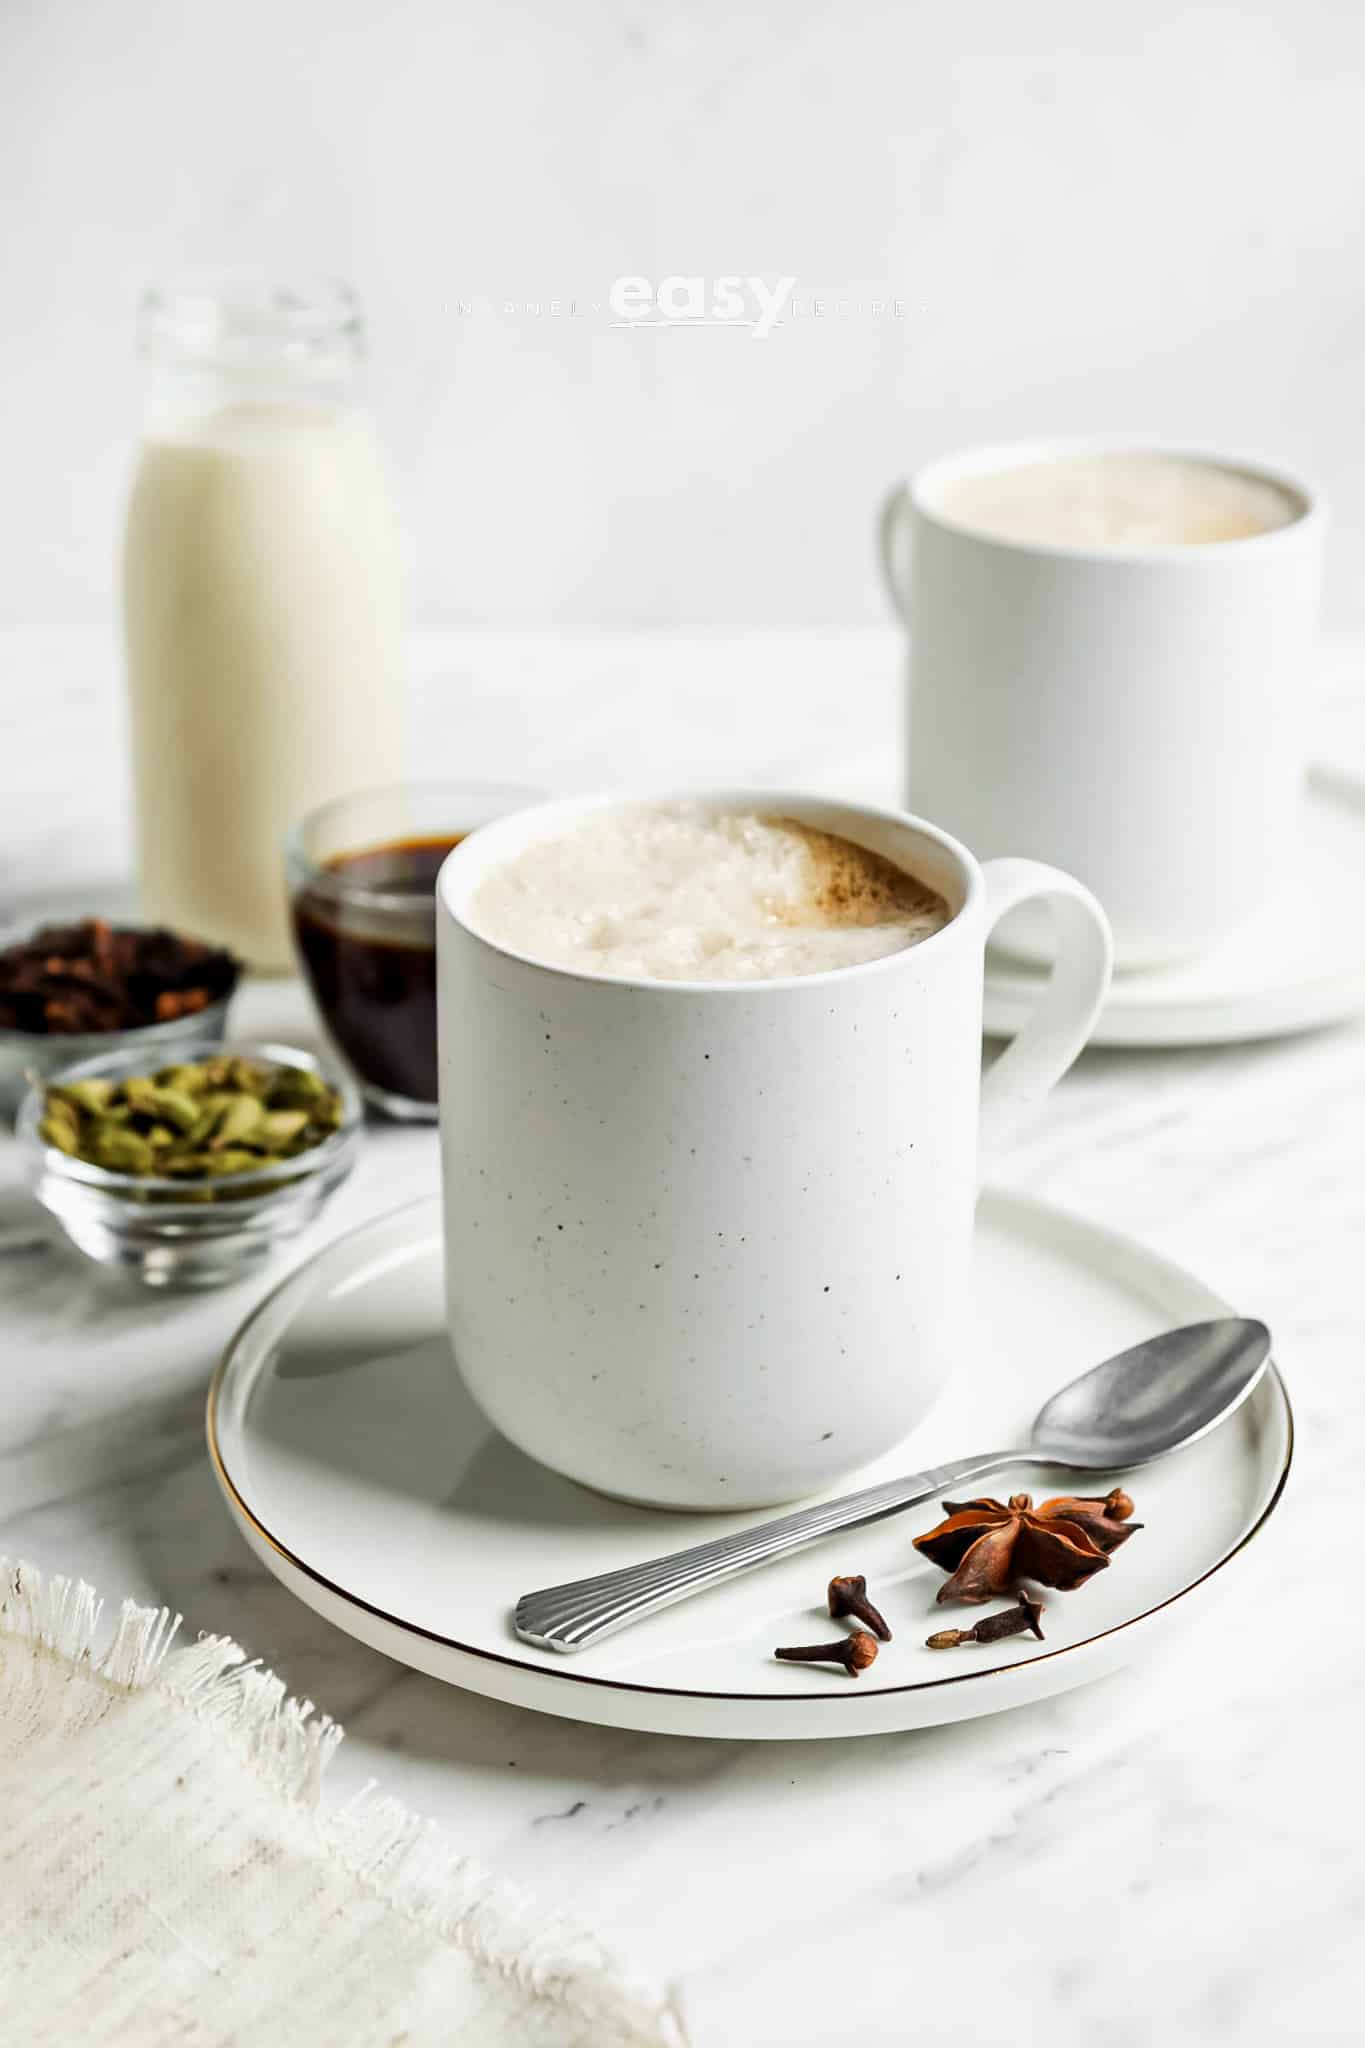 Photo of a white mug filled with a Dirty Chai Latte. There are small bowls with cardamom pods, star anise, and black tea around the mug.